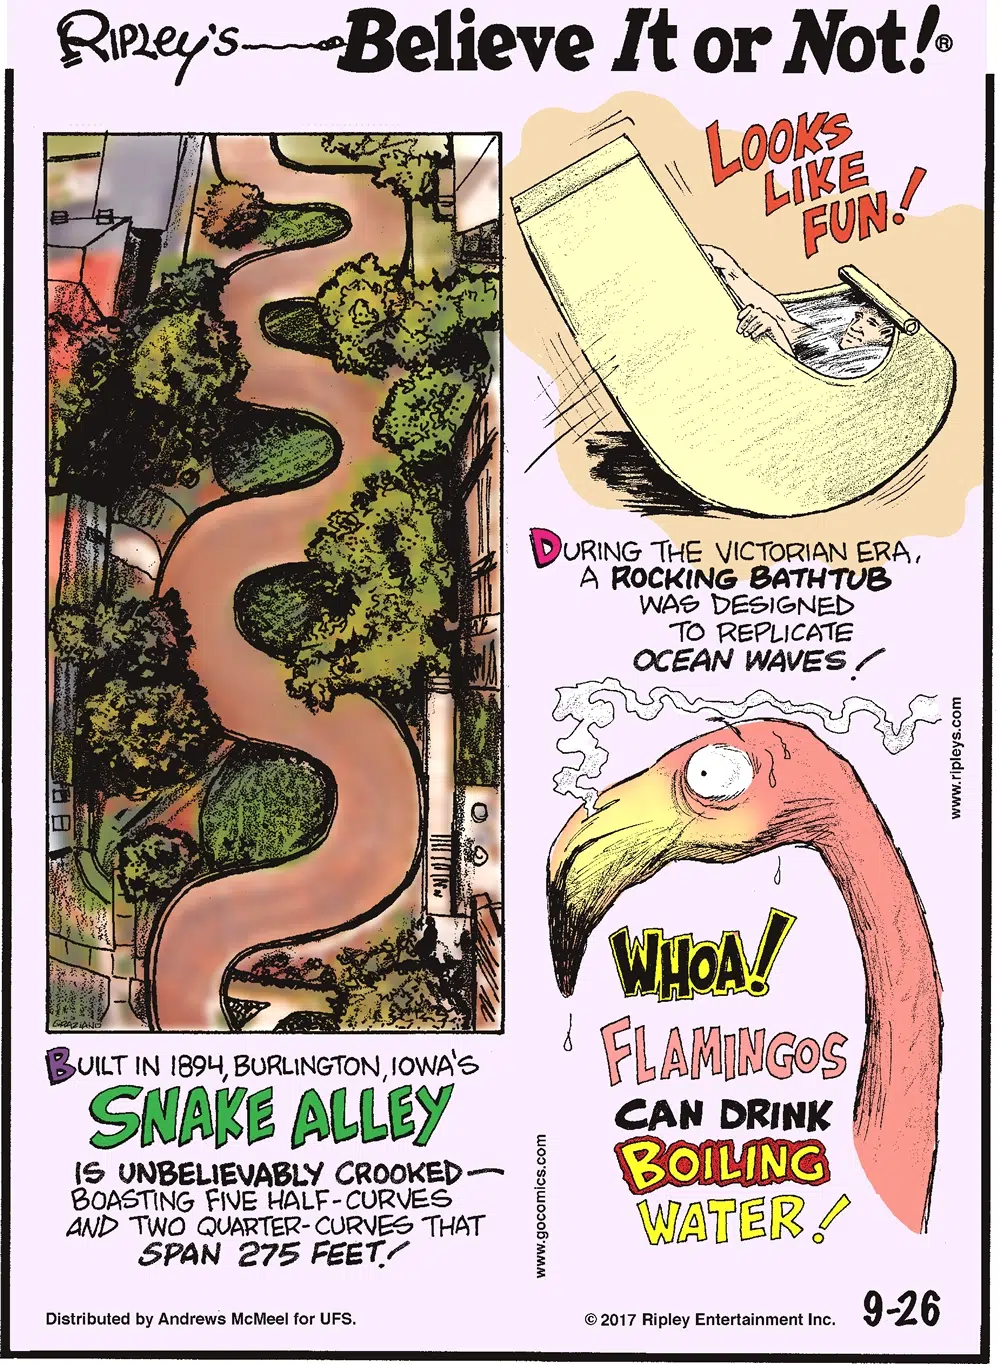 Built in 1894, Burlington, Iowa's Snake Alley is unbelievably crooked - boasting five half-curves and two quarter-curves that span 275 feet!--------------------- During the Victorian Era, a rocking bathtub was designed to replicate ocean waves!-------------------- Flamingos can drink boiling water!